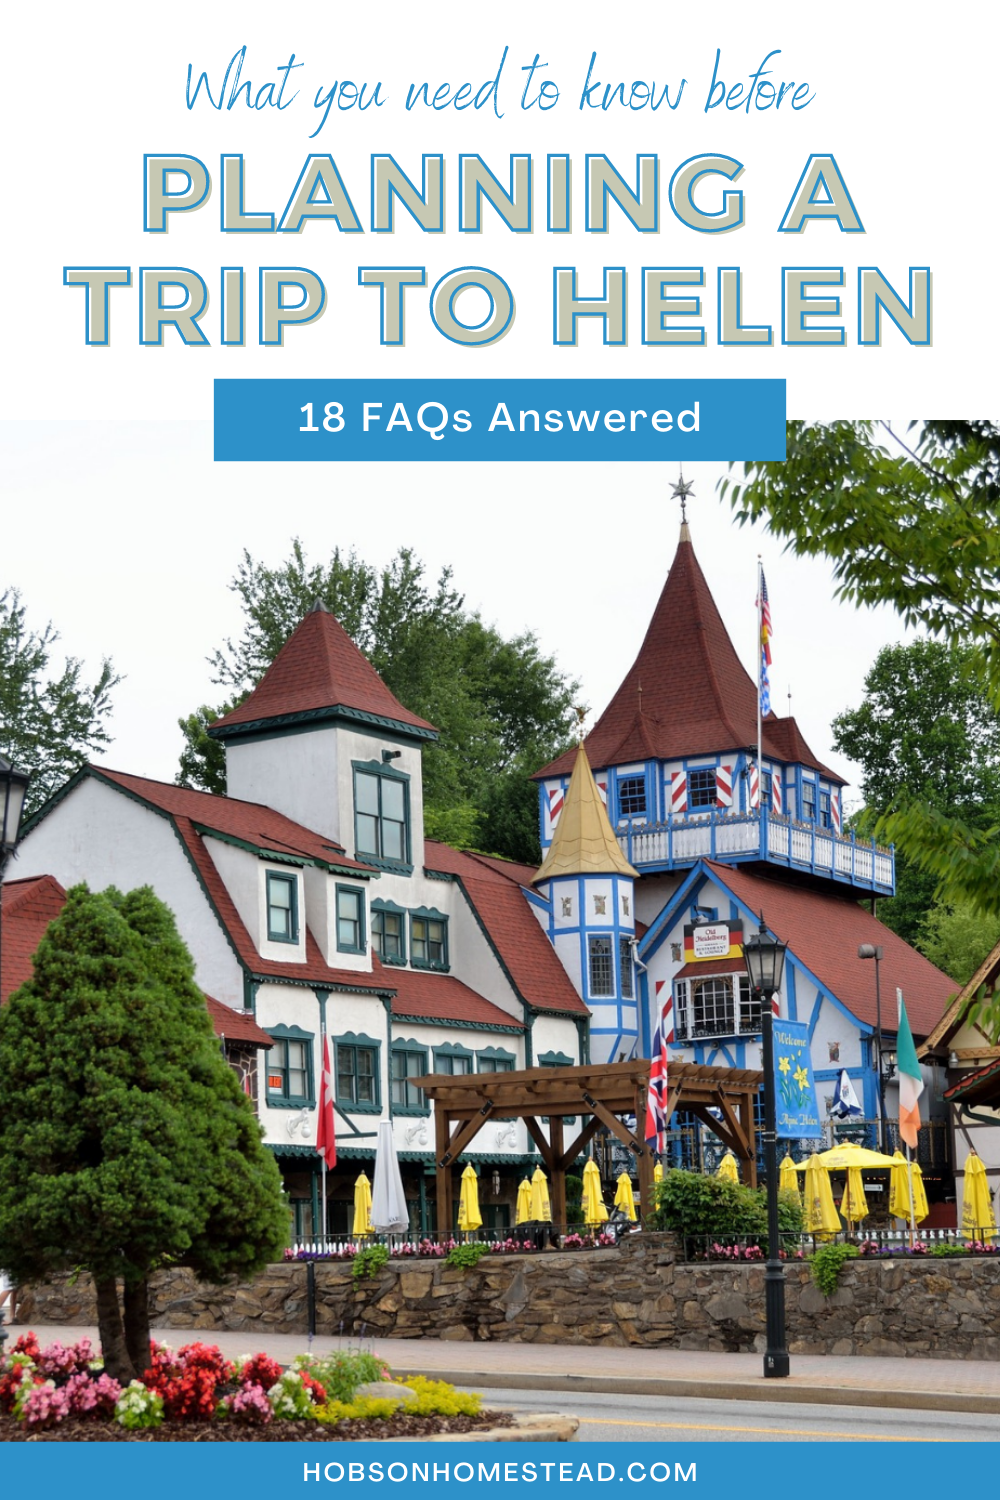 What You Need to Know before Planning a Trip to Helen—18 FAQs Answered